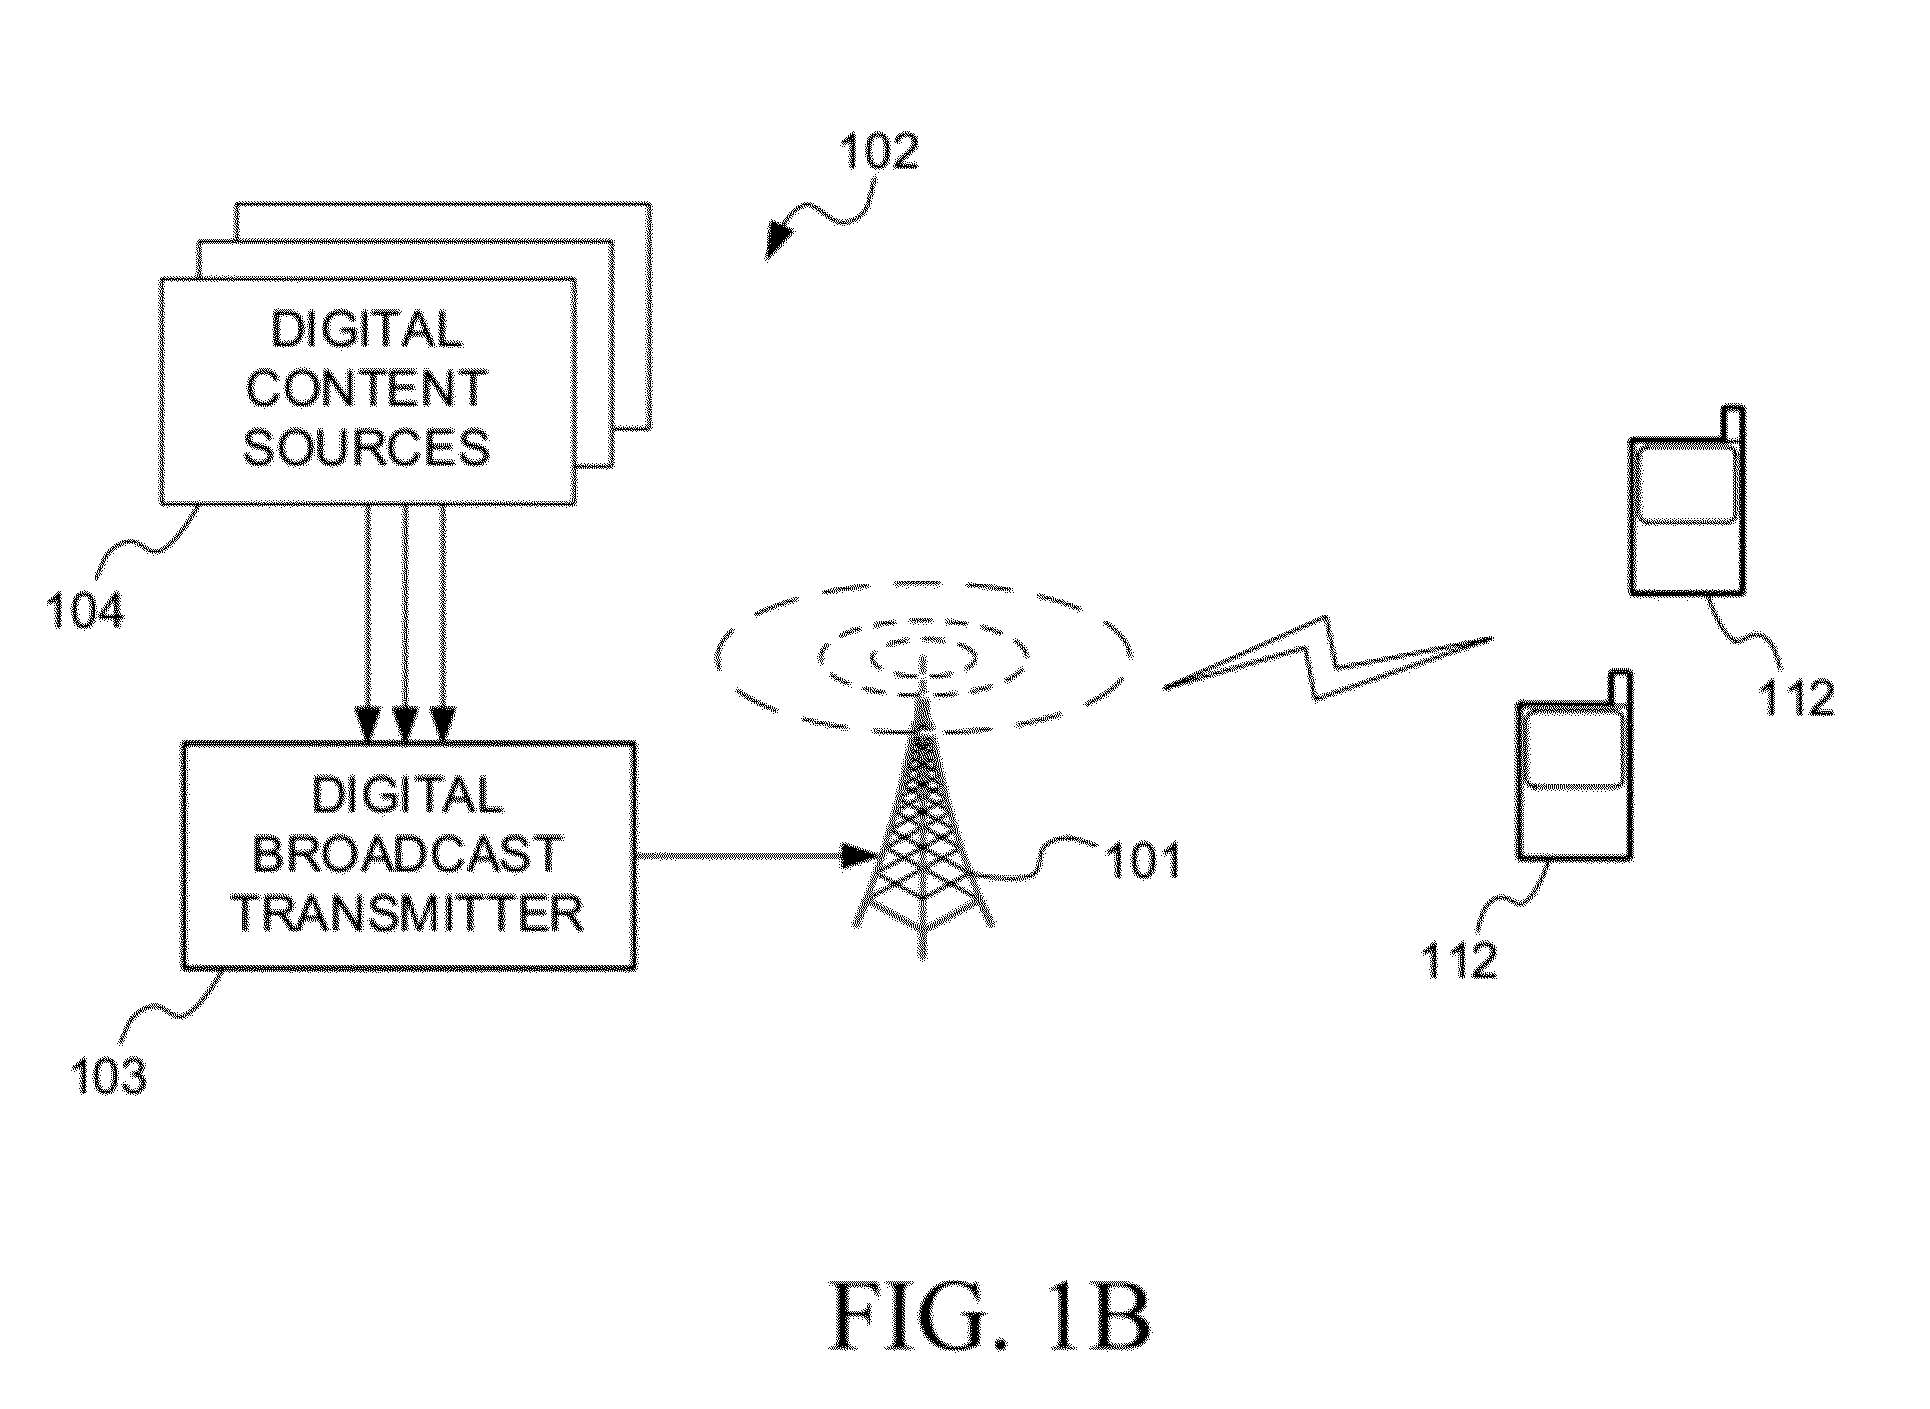 Providing signaling information in an electronic service guide